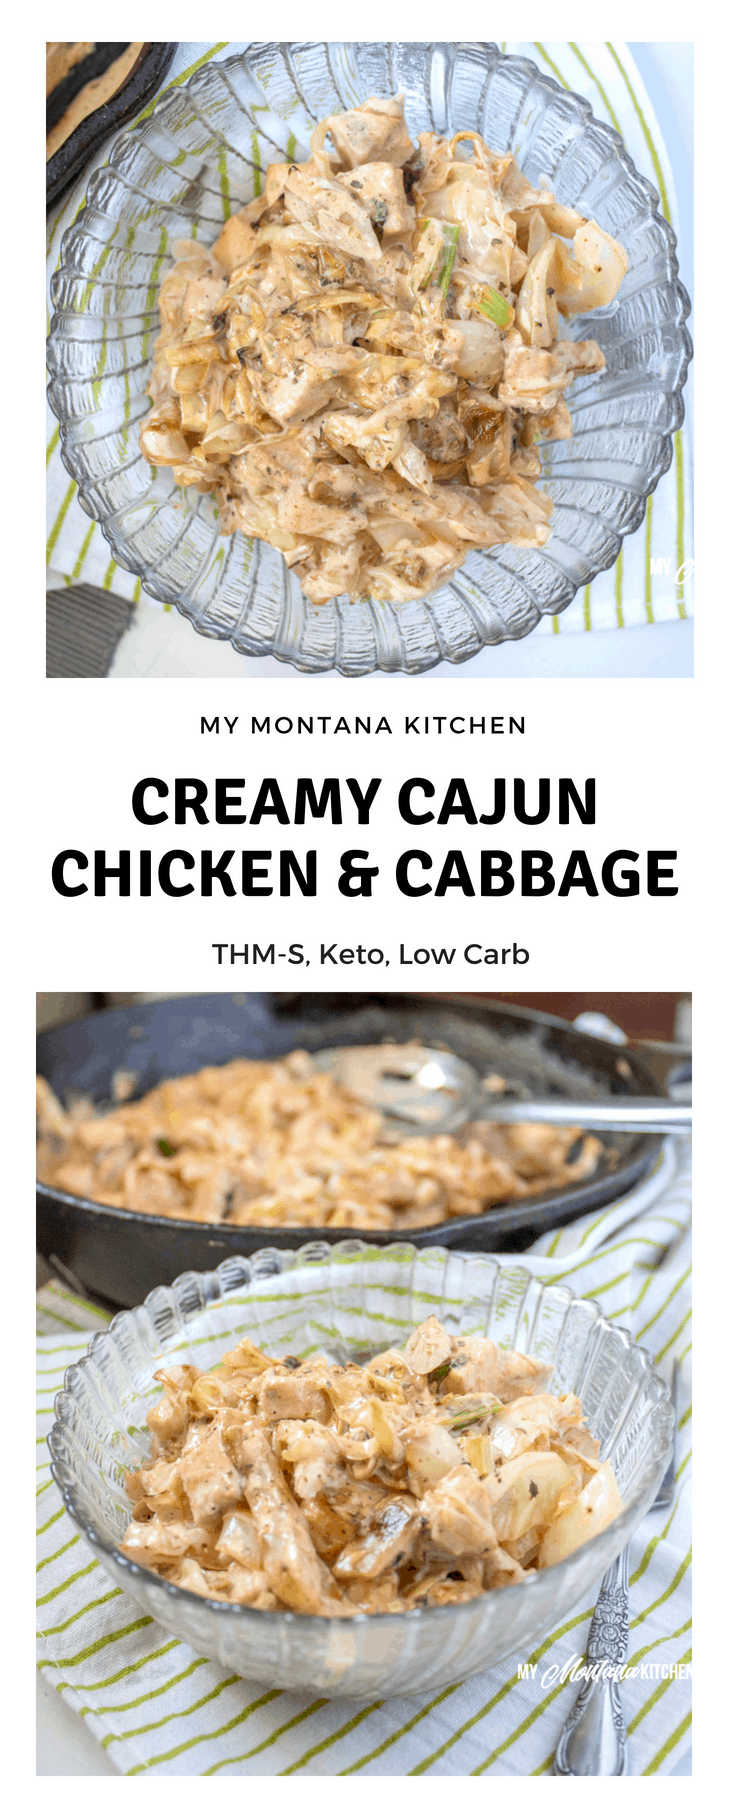 This Creamy Cajun Chicken and Cabbage tastes like a Cajun Alfredo. It is an easy low carb meal that can be made on your stovetop. Perfect for summer or any time you need an easy, quick meal idea. #trimhealthymama #thm #lowcarb #cajun #chicken #cabbage #glutenfree #chickenandcabbage #easydinner #healthymeal